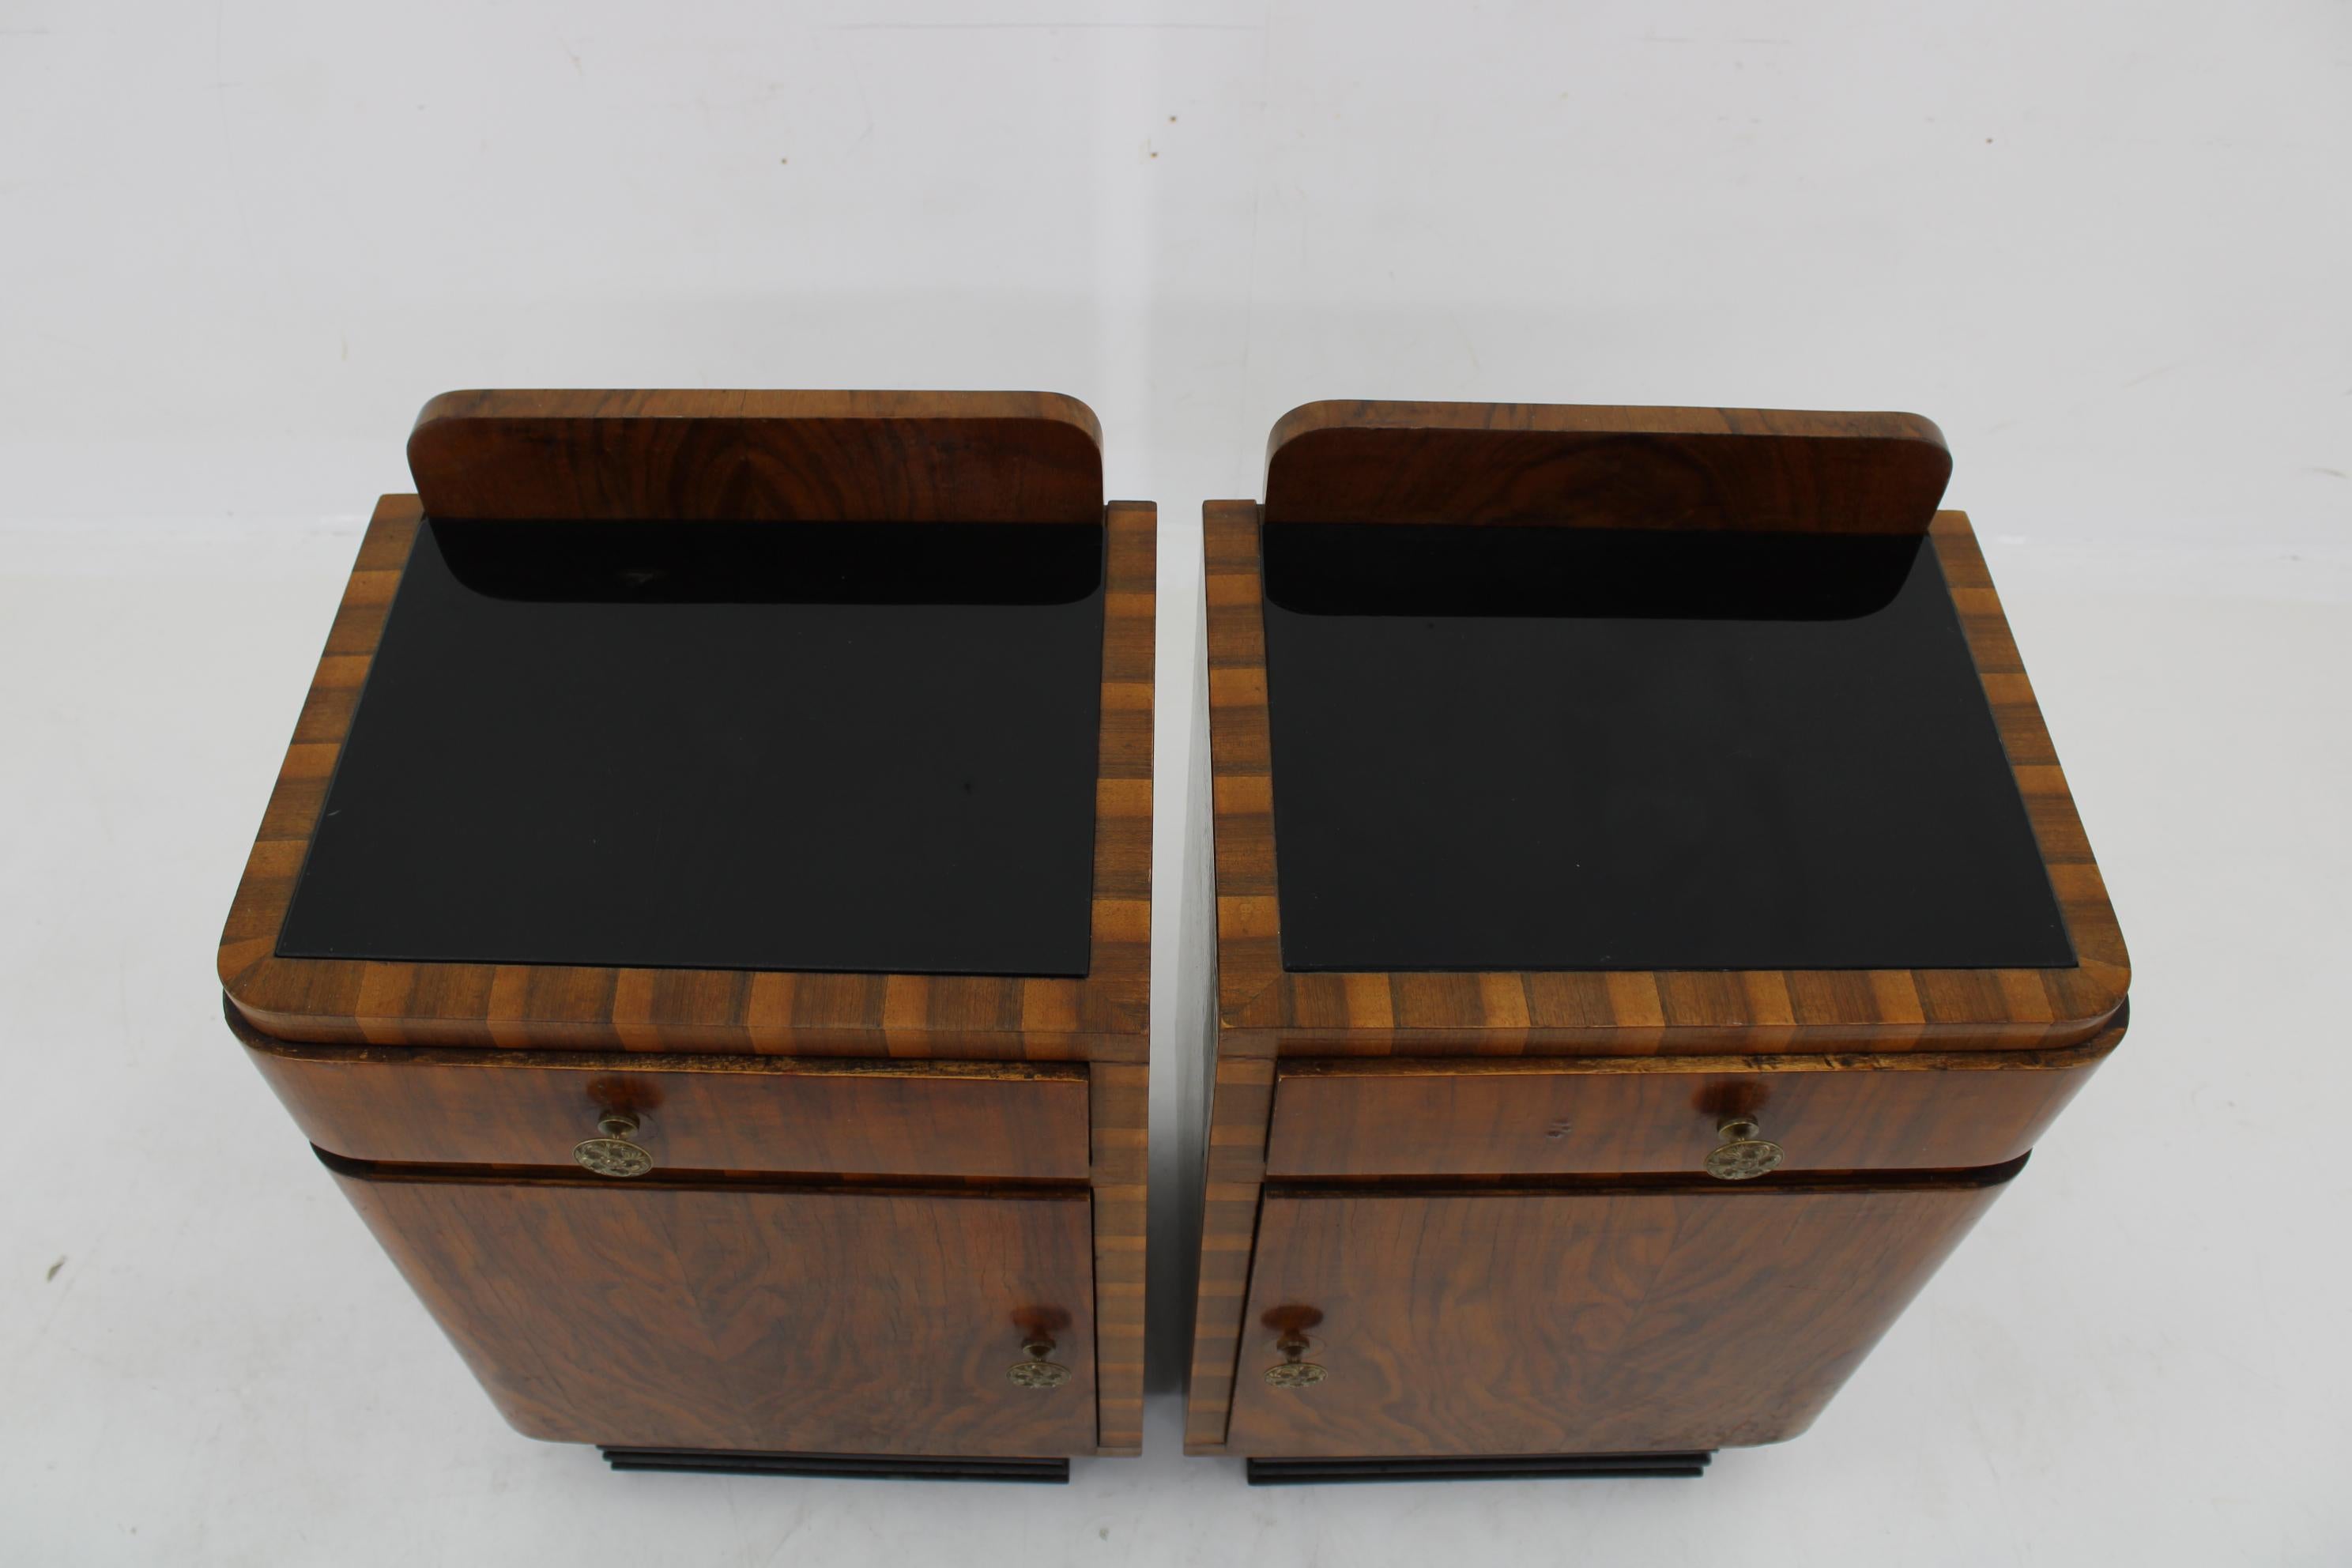 Wood 1940s Pair of Art Deco Nightstands in Walnut Finish, Italy